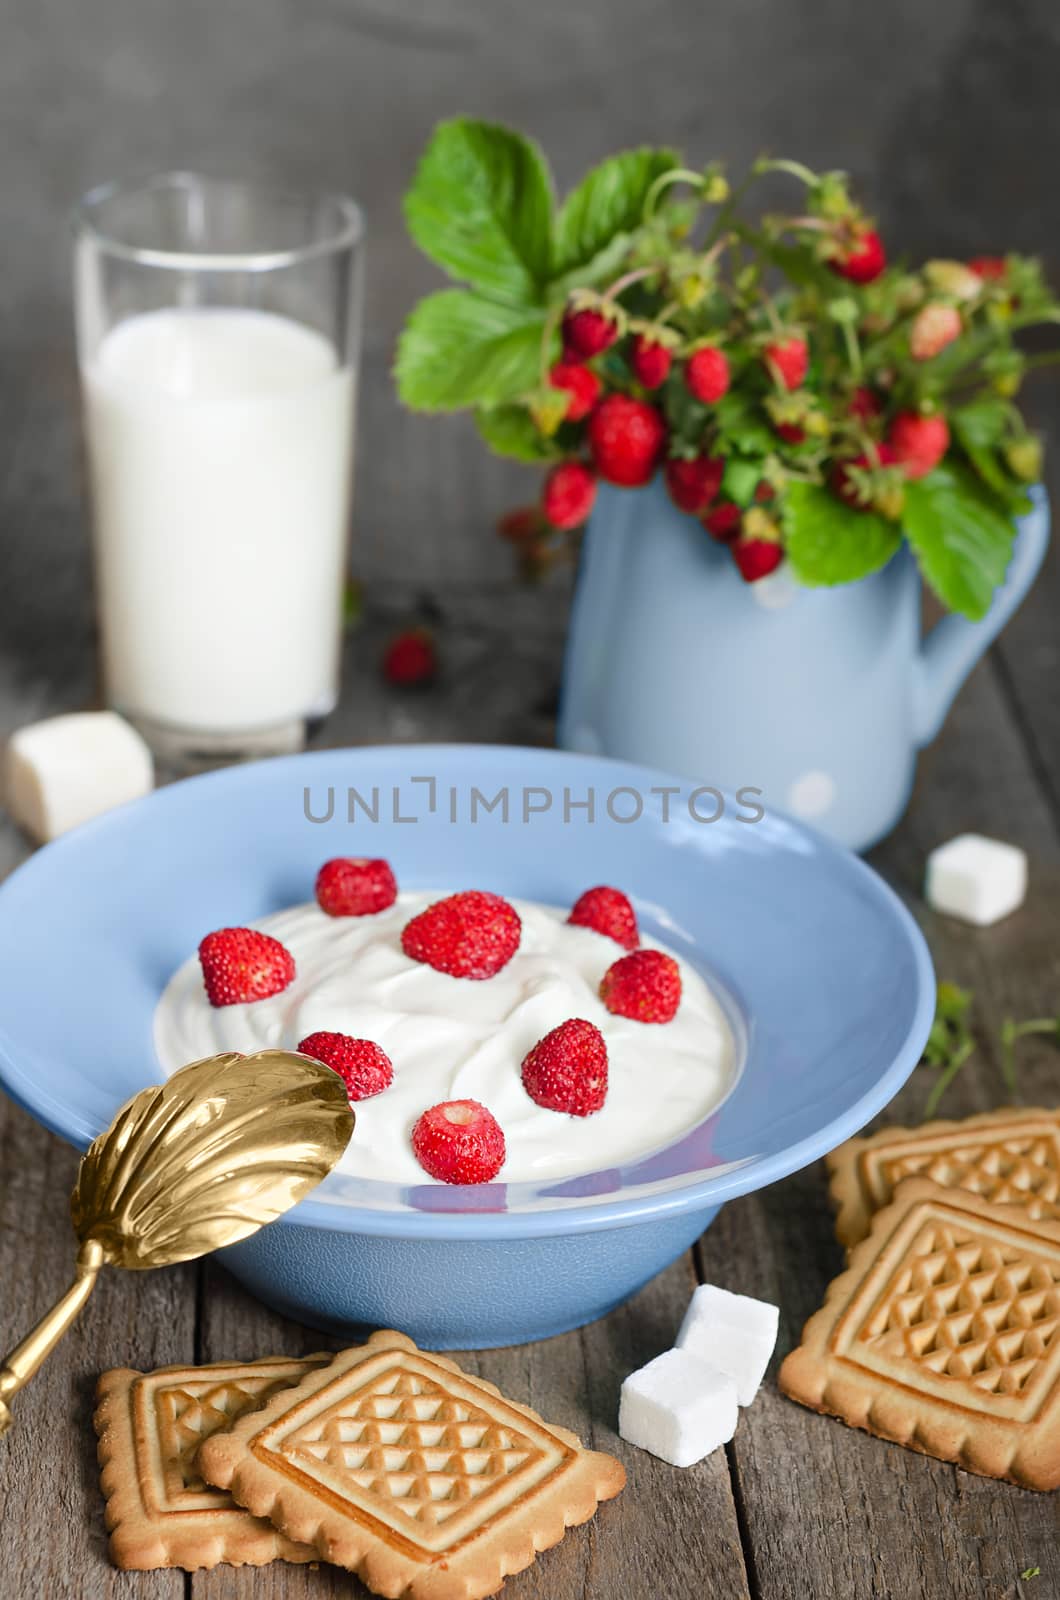 Wild strawberry with cream, cookies and milk, the old rough boards. by Gaina